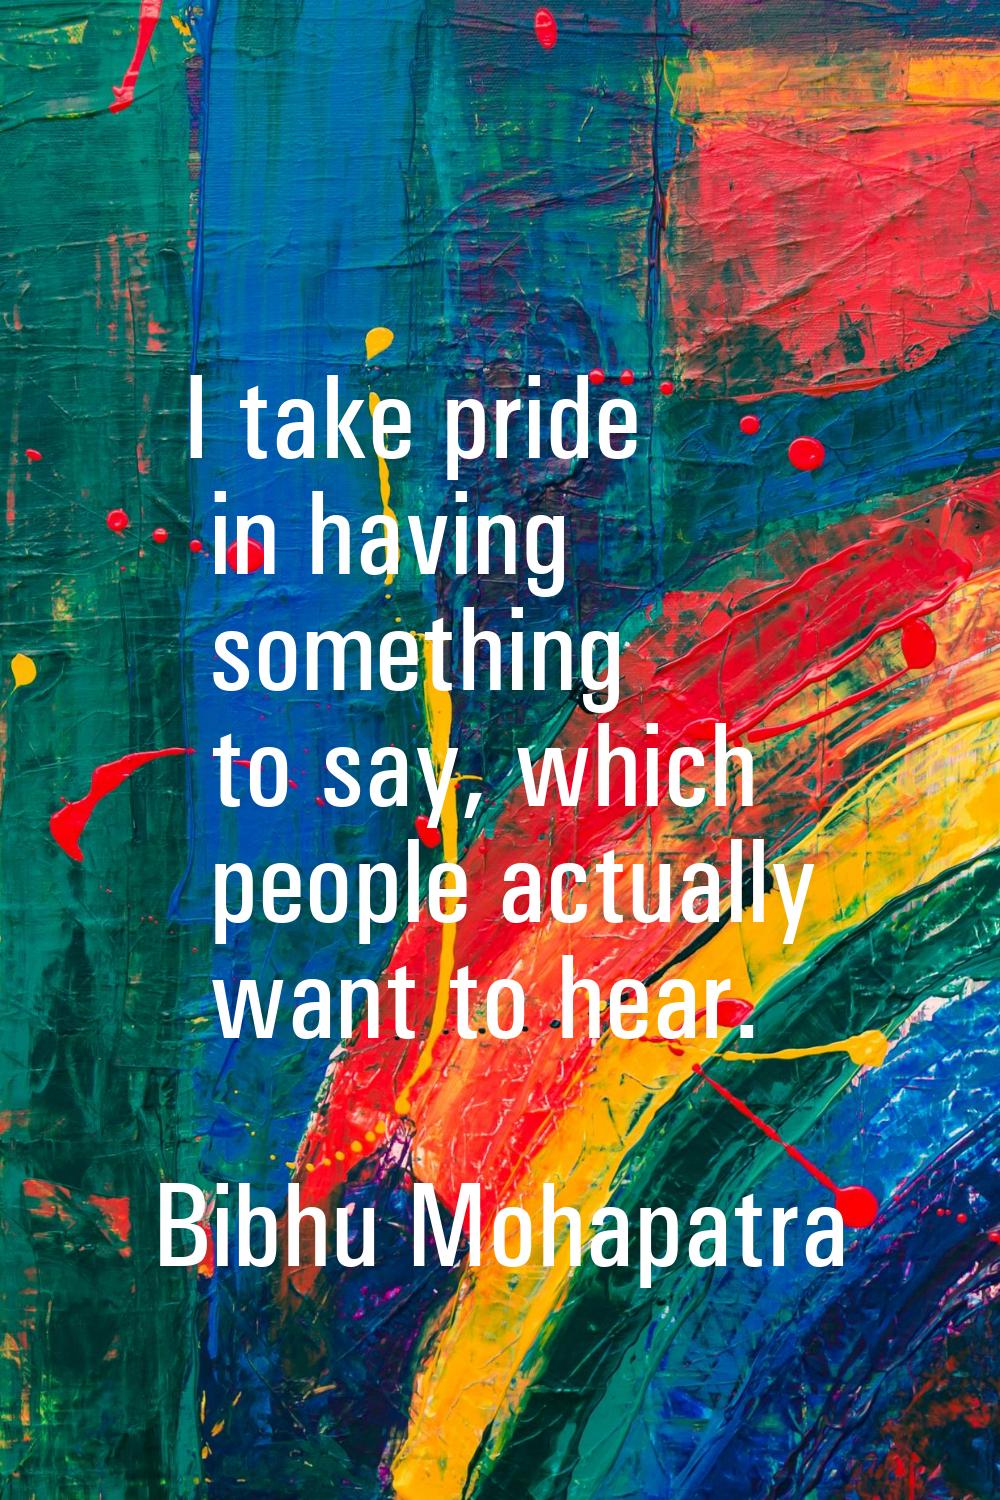 I take pride in having something to say, which people actually want to hear.